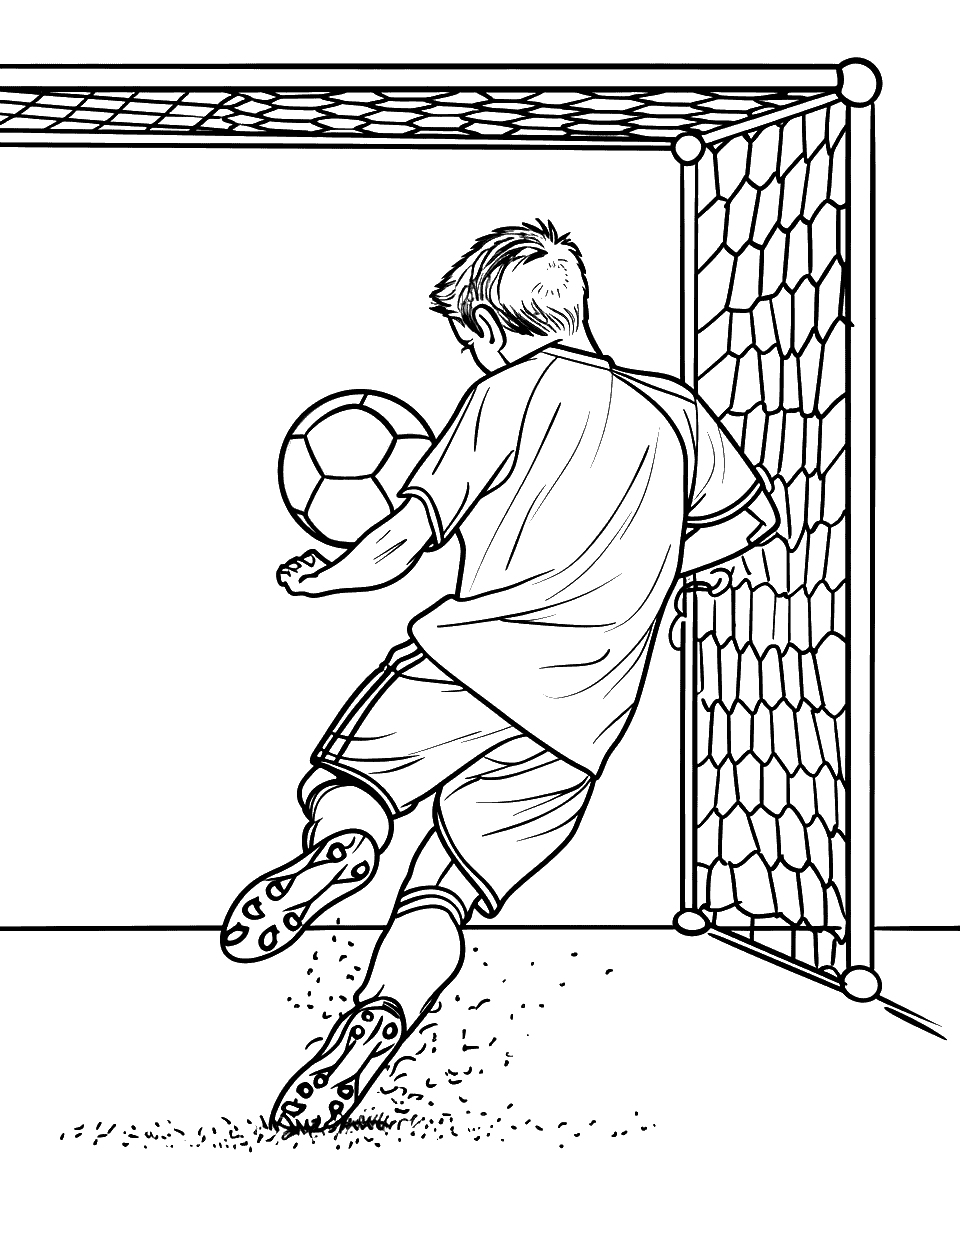 Soccer Player Scoring a Goal Coloring Page - A soccer player in the moment of kicking the ball into the net for a goal.